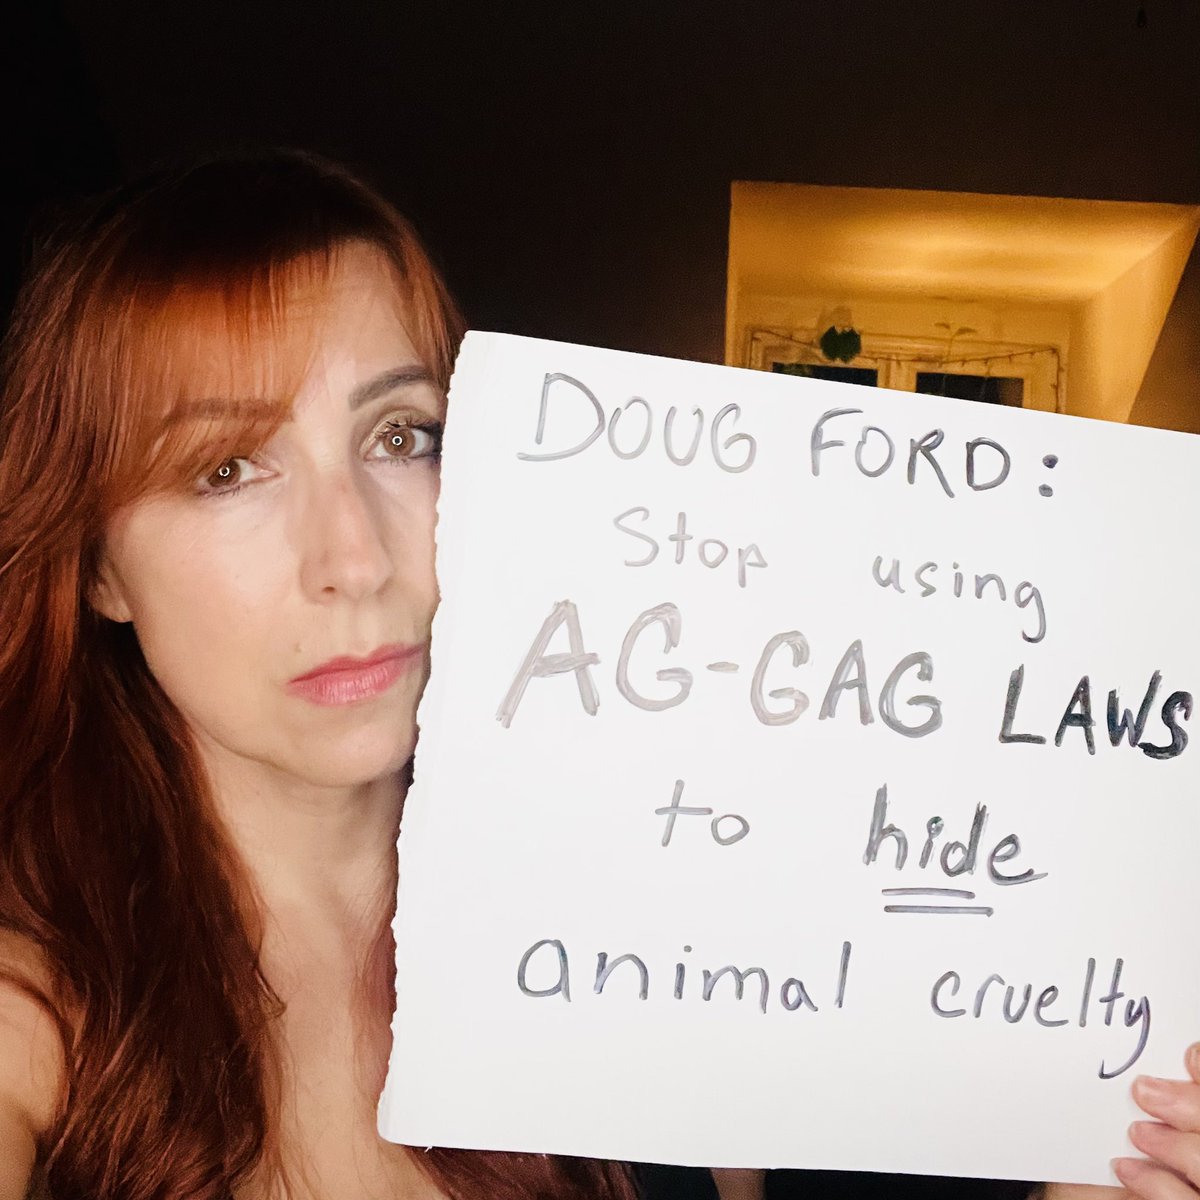 Today Animal Justice is going up against the Ford Government in a court battle over the province’s shocking AG-GAG law.

This draconian law was designed to cover up animal cruelty in the ag industry.

#StopAgGagLaws